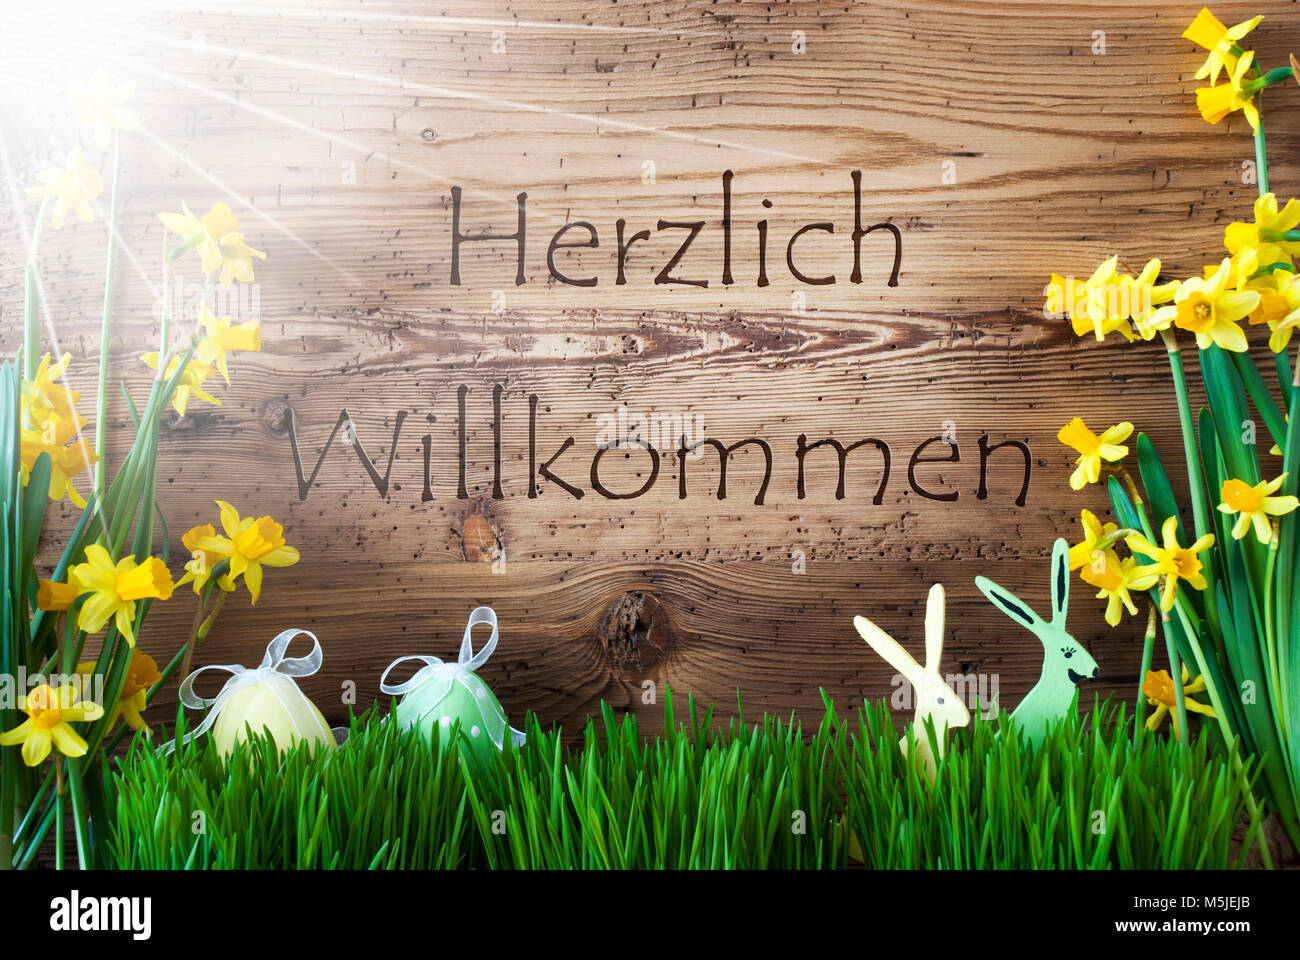 Wooden Background With German Text Herzlich Willkommen Means Welcome. Easter Decoration Like Easter Eggs And Easter Bunny. Sunny Yellow Spring Flower  Stock Photo